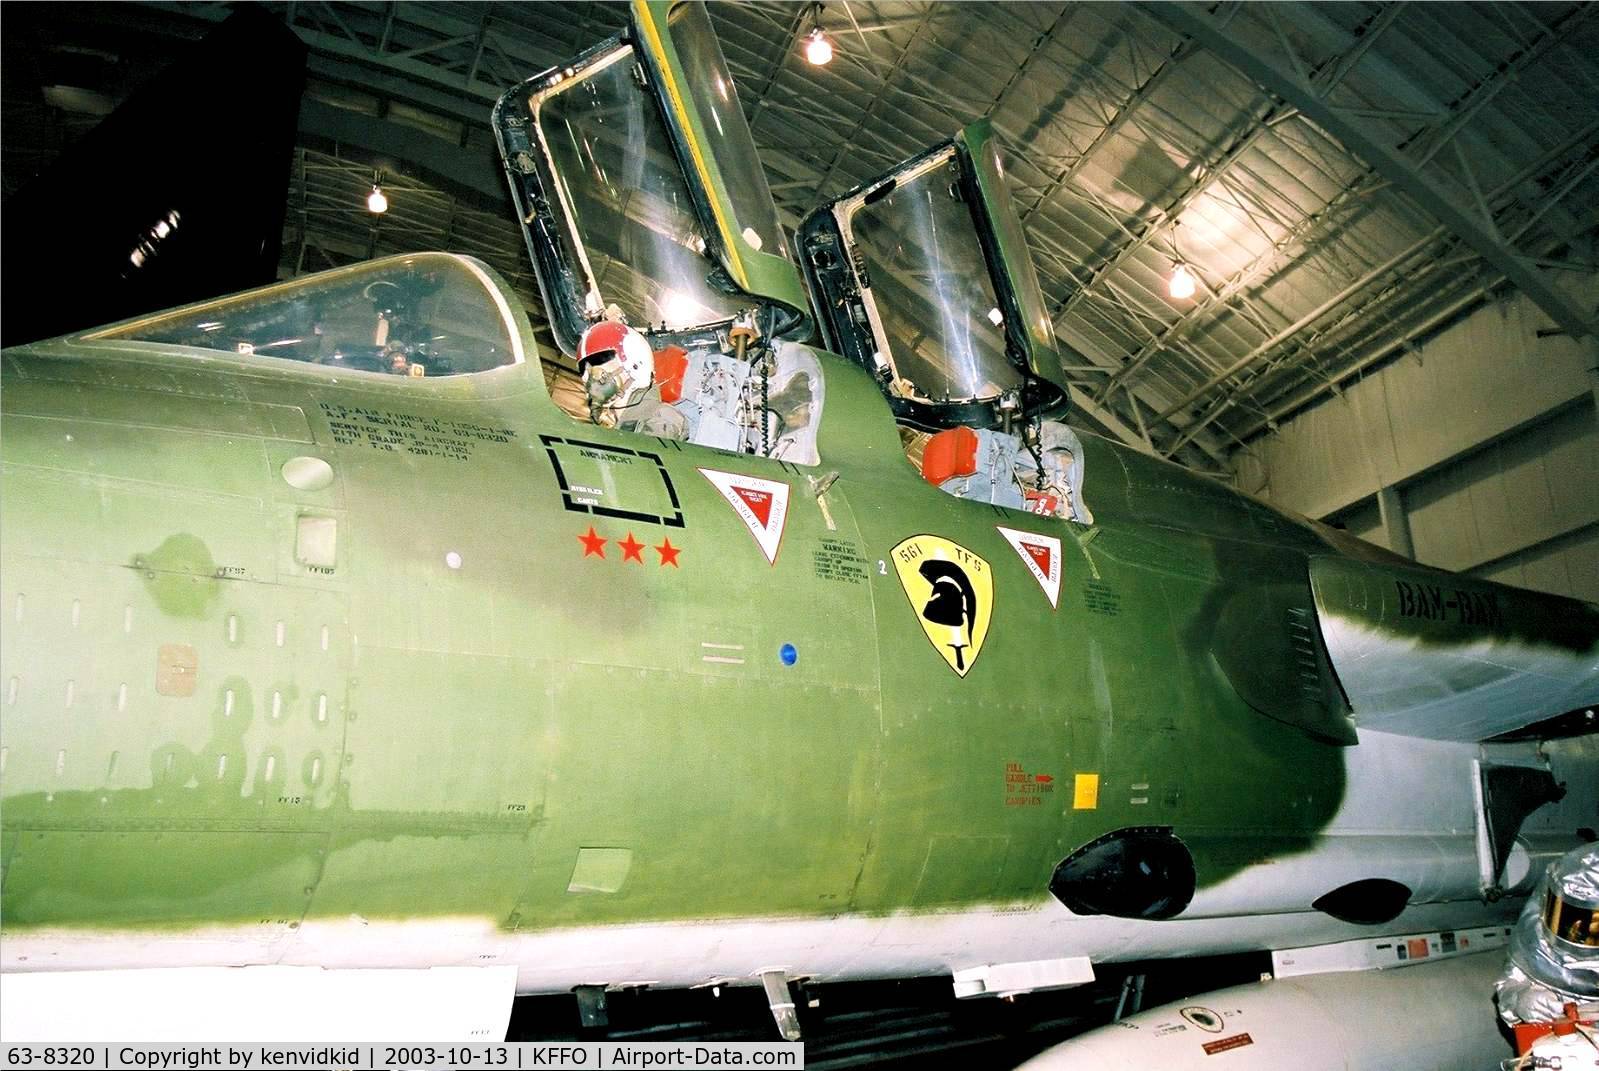 63-8320, 1963 Republic F-105G-1-RE Thunderchief C/N F097, At the Museum of the United States Air Force Dayton Ohio.